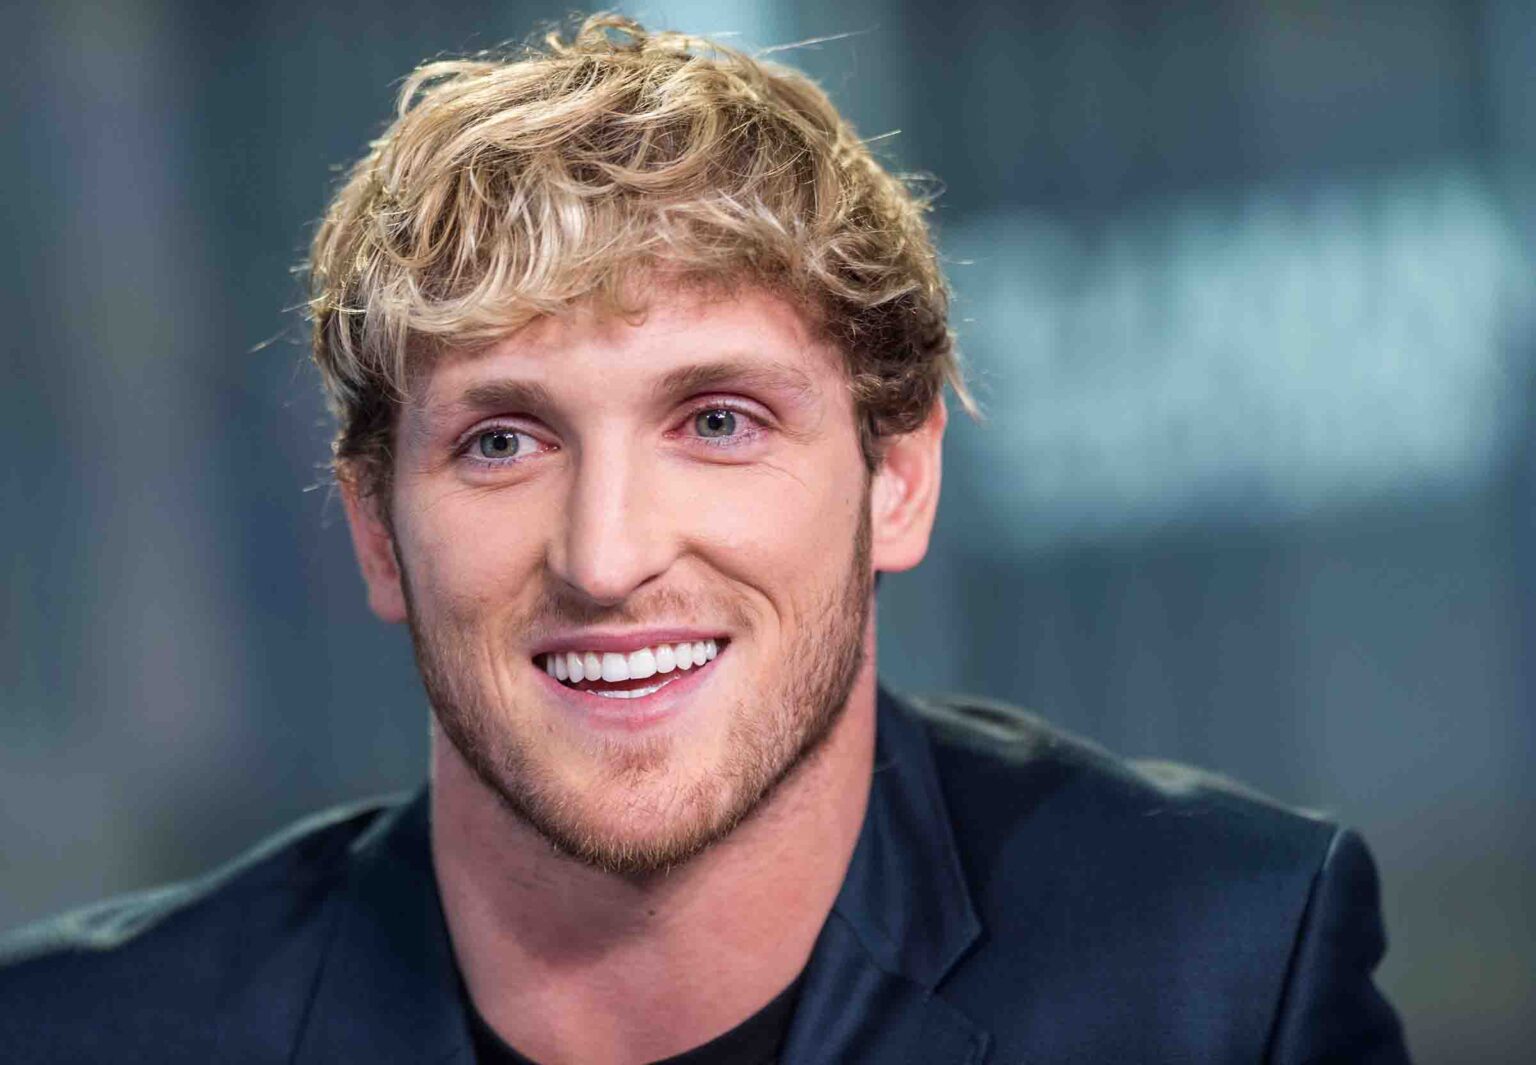 Logan Paul got Twitter mad again. This time he announced he's moving to Puerto Rico to protect his net worth.